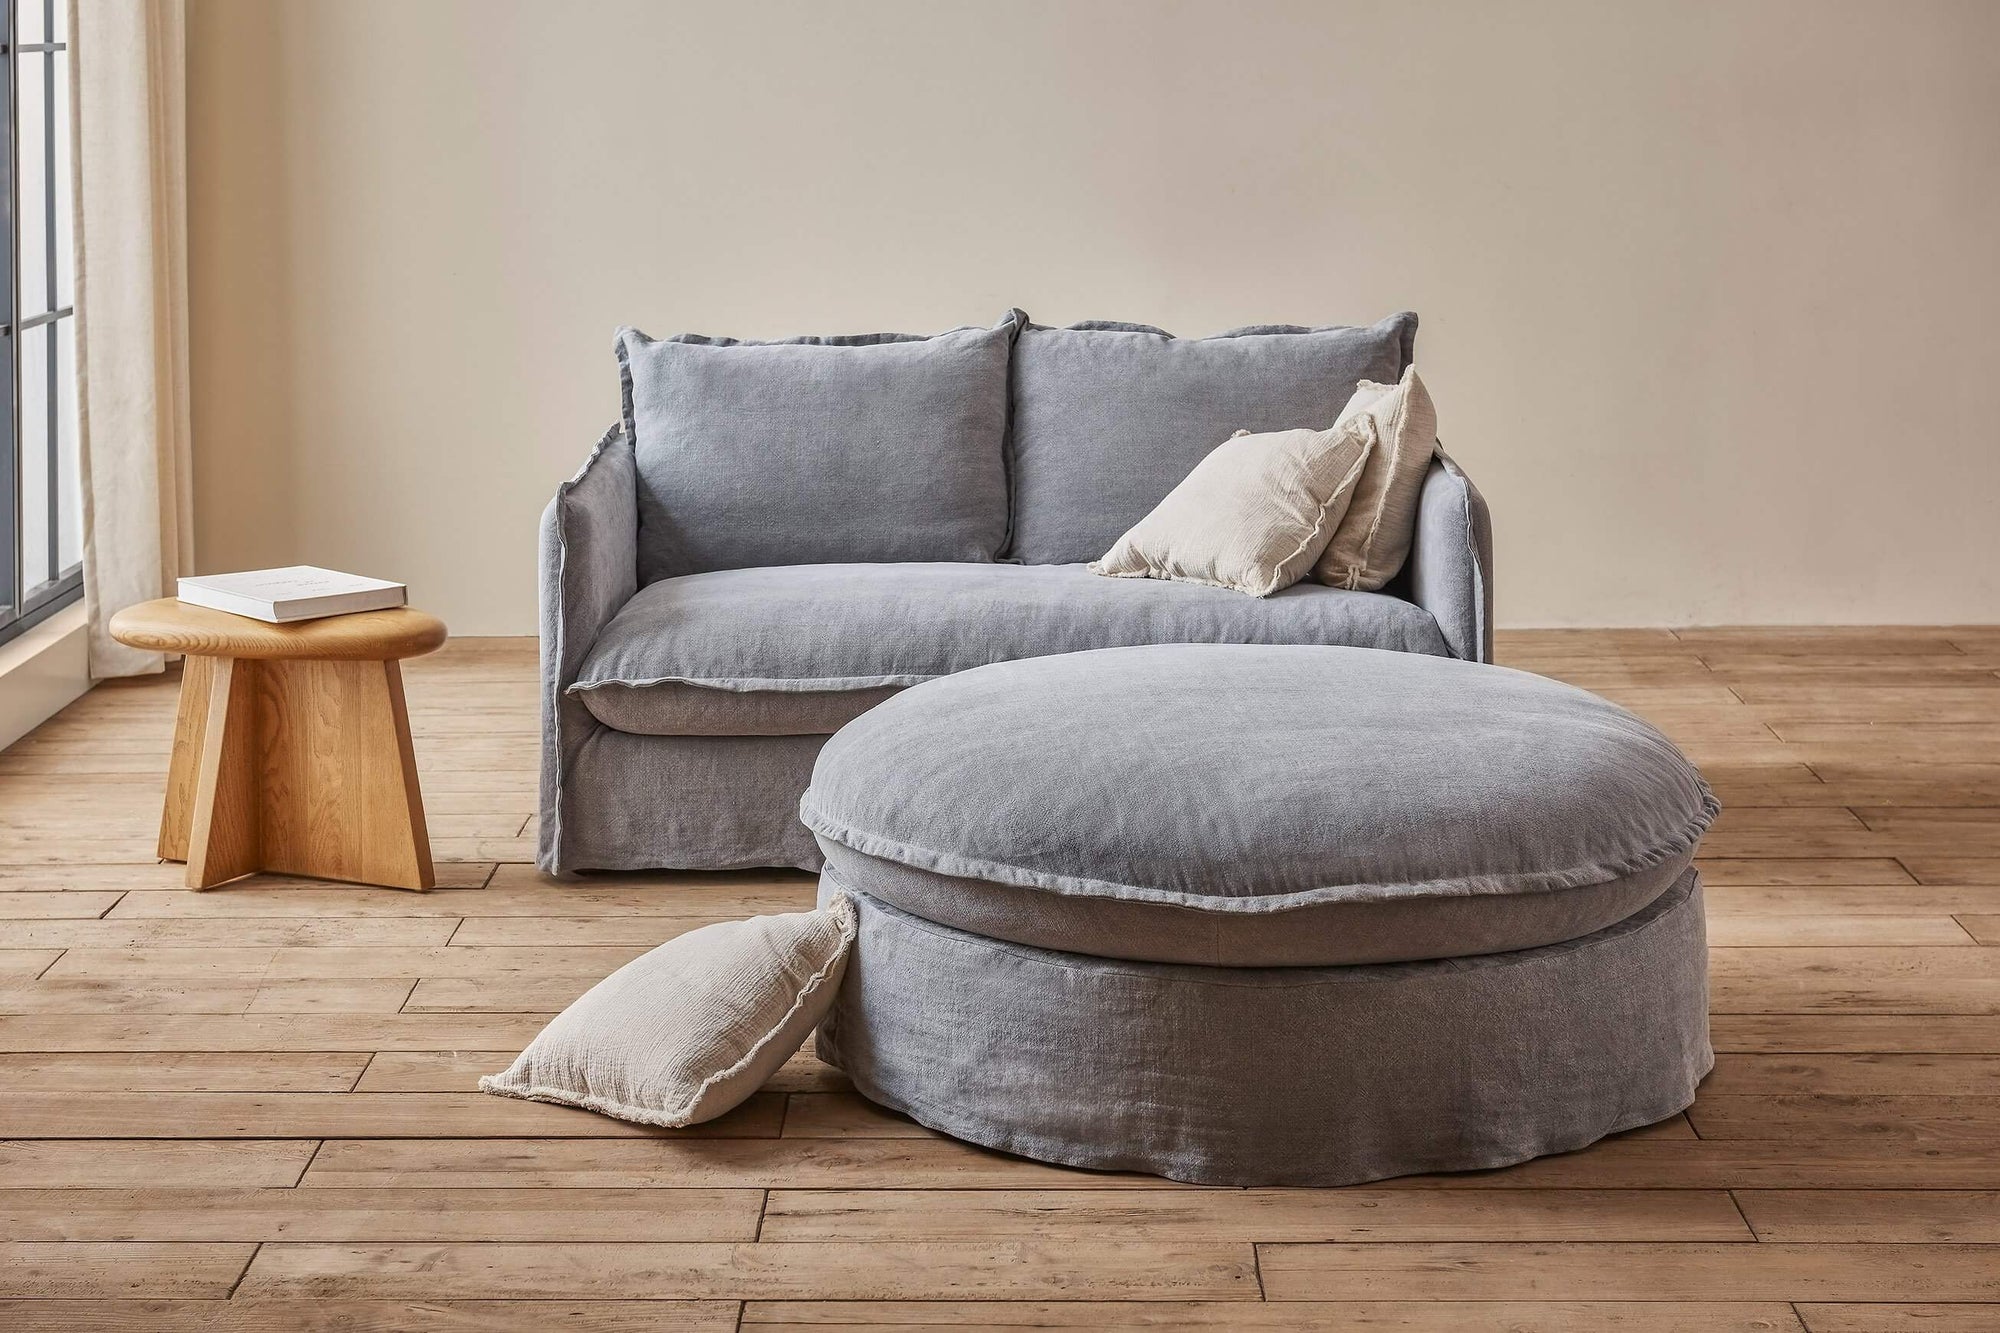 Neva Round Ottoman in Ink Cap, a medium cool grey Light Weight Linen, placed in fromt of a Neva Loveseat and an Amina side table.